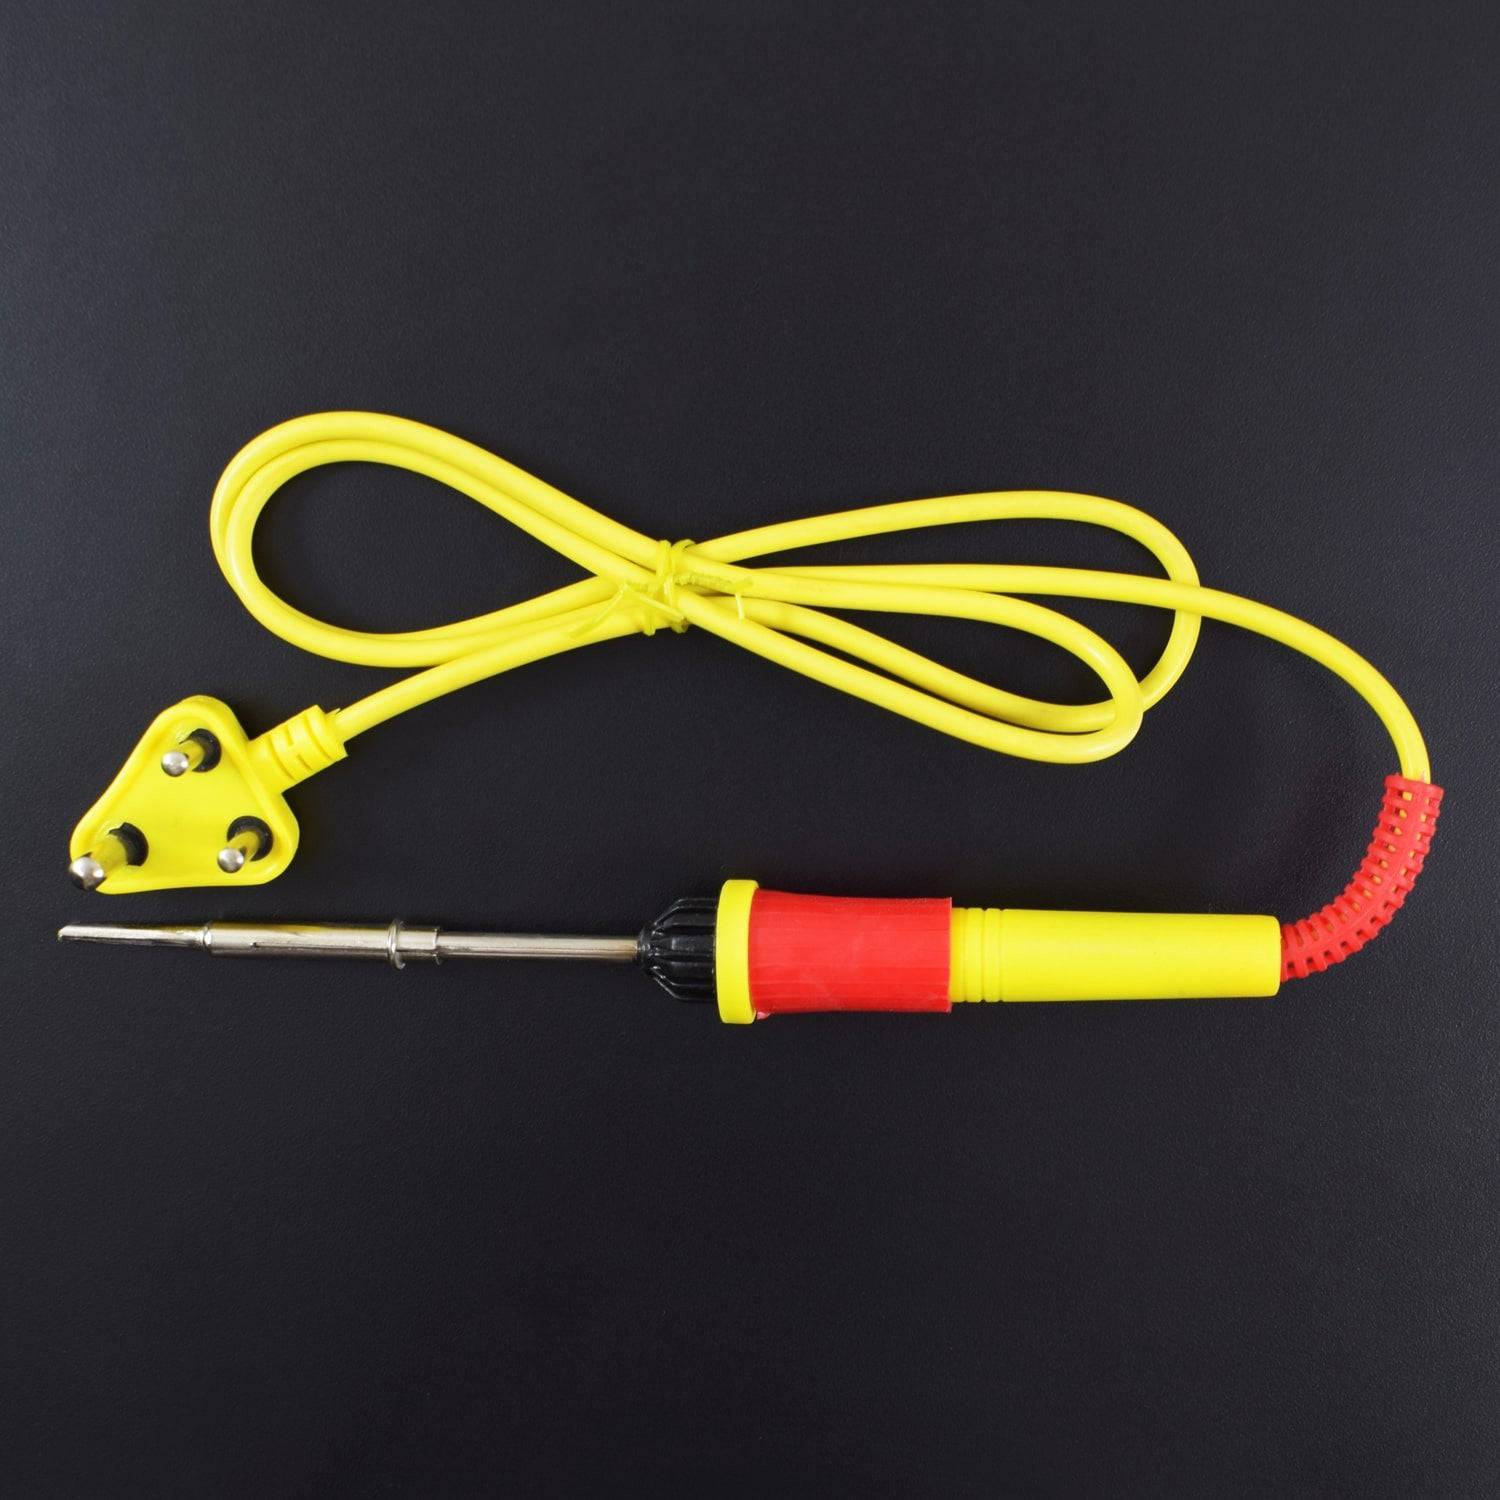 Soldering Iron for home use and small repairing work for electronics devices - EC013 - REES52